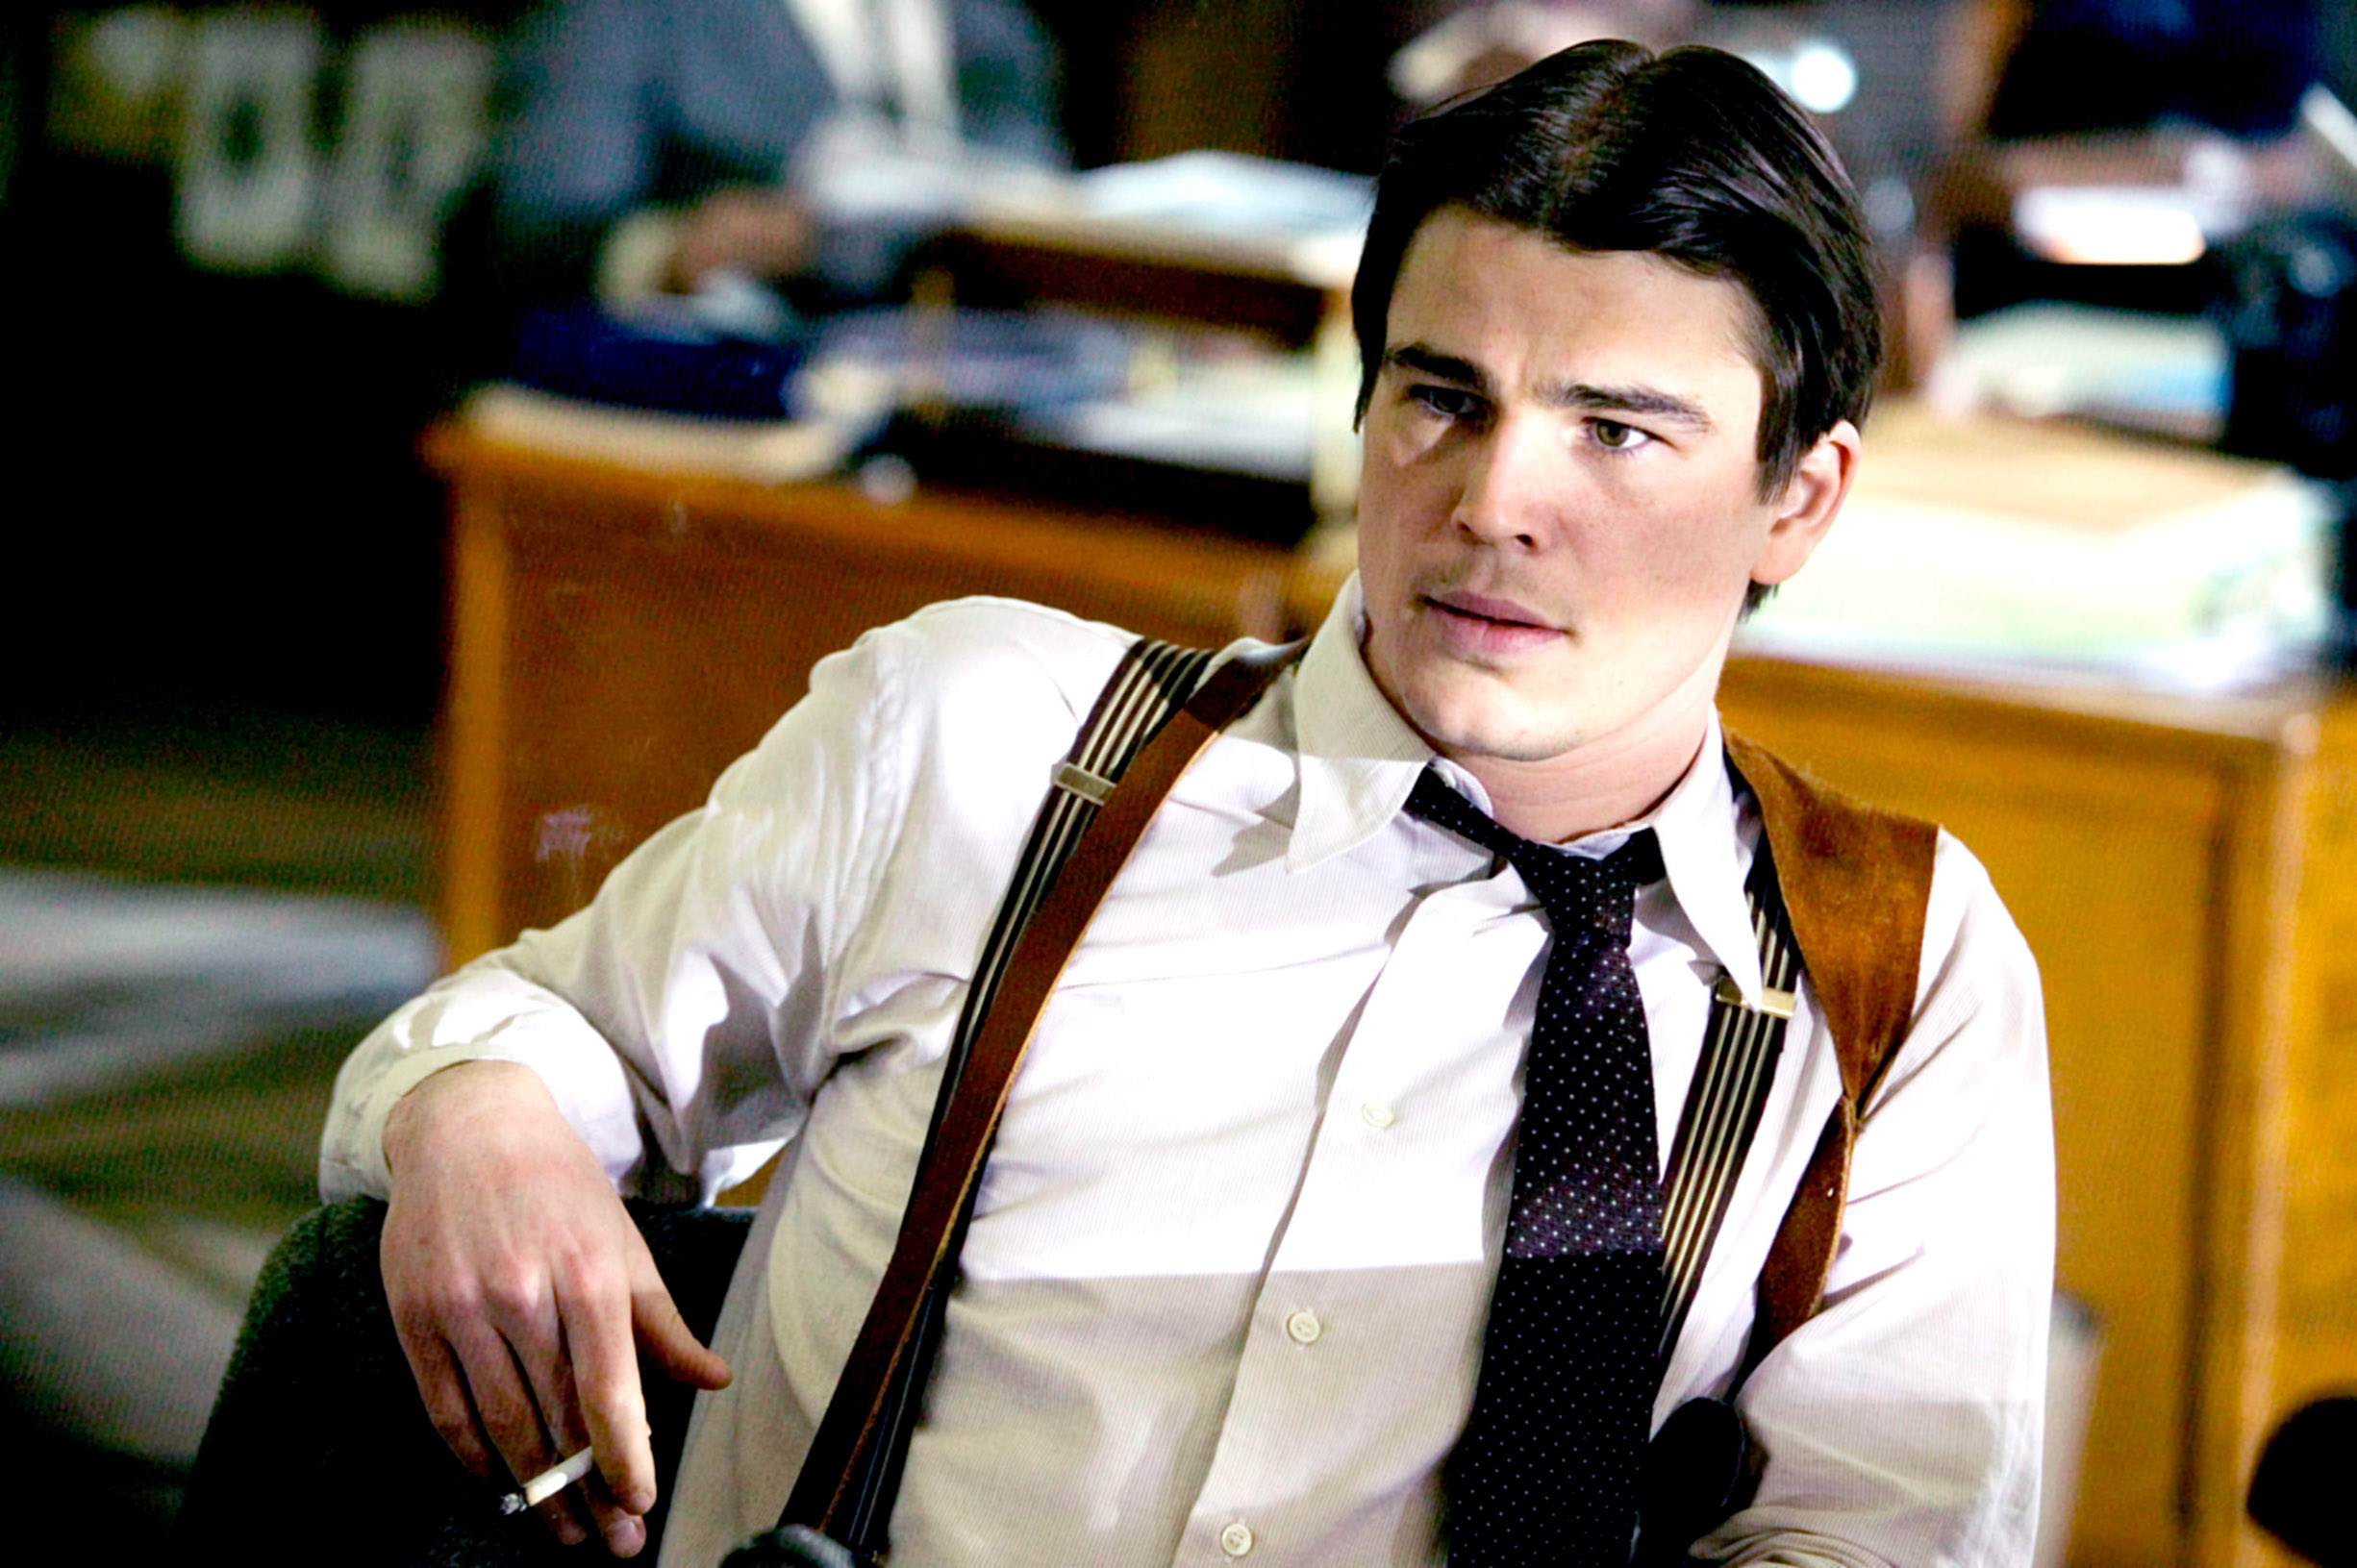 THE BLACK DAHLIA, Josh Hartnett, 2006, (c) Universal/courtesy Everett Collection, Image: 97800858, License: Rights-managed, Restrictions: For usage credit please use; ©Universal/Courtesy Everett Collection, Model Release: no, Credit line: Universal Collection / Everett / Profimedia